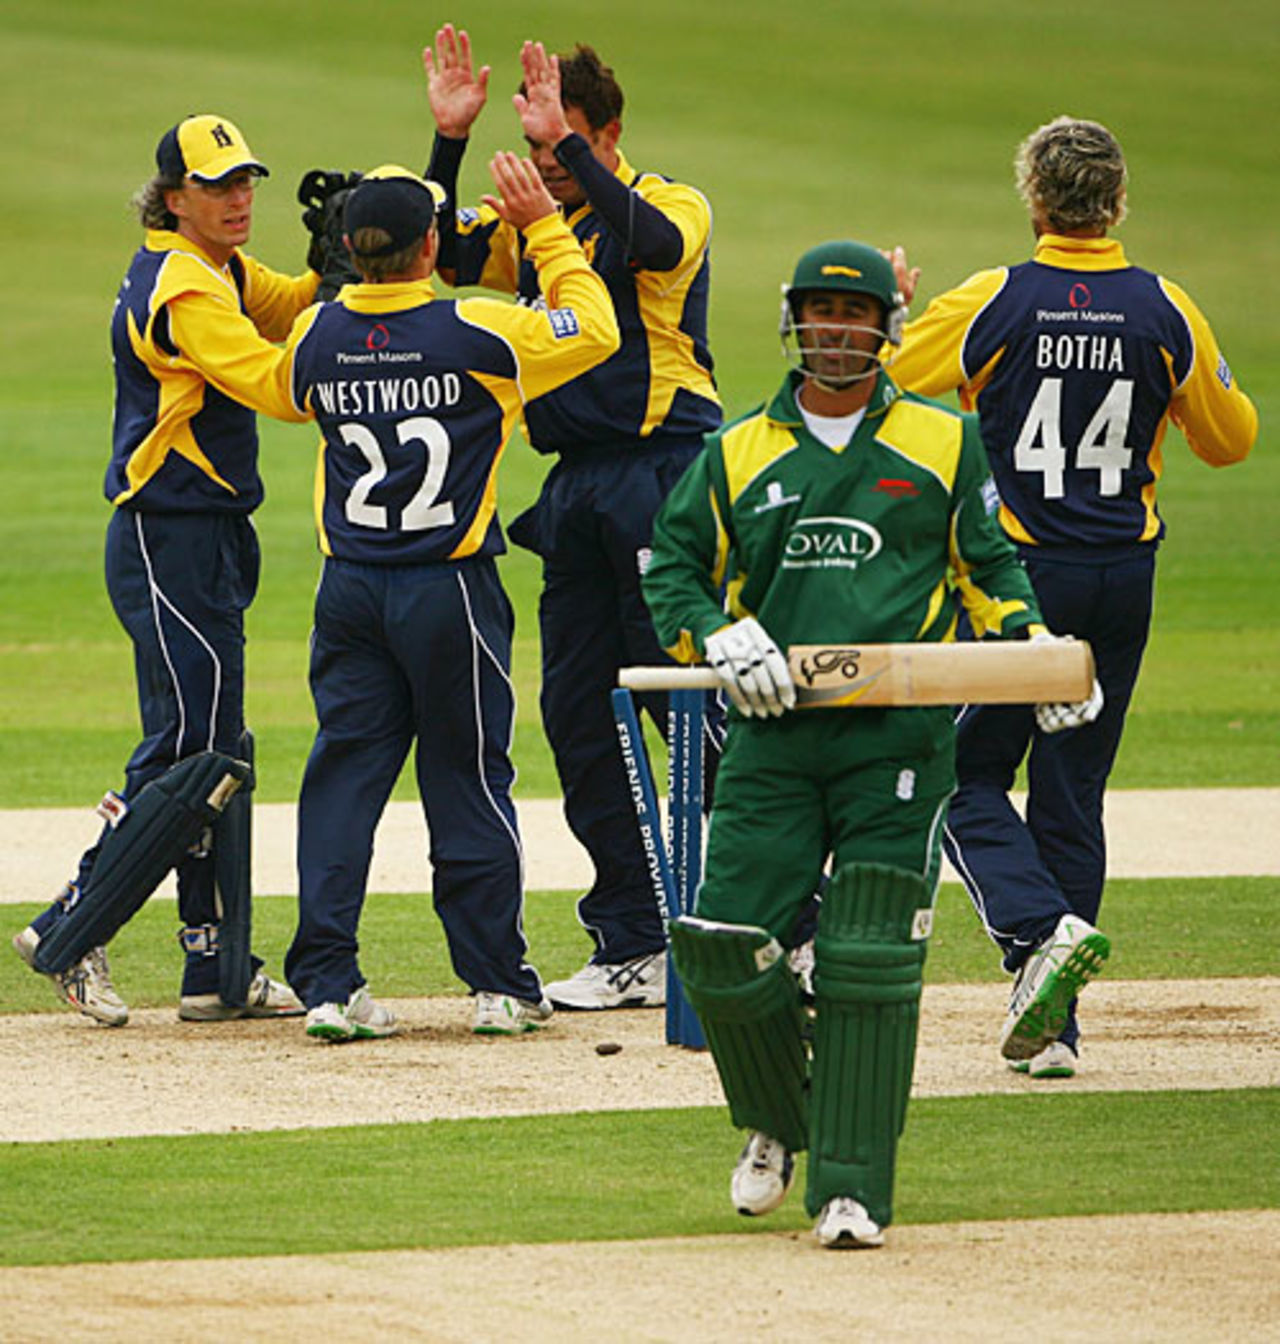 Neil Carter is congratulated after bowling HD Ackerman,  Leicestershire v Warwickshire, Oakham School, May 26, 2008